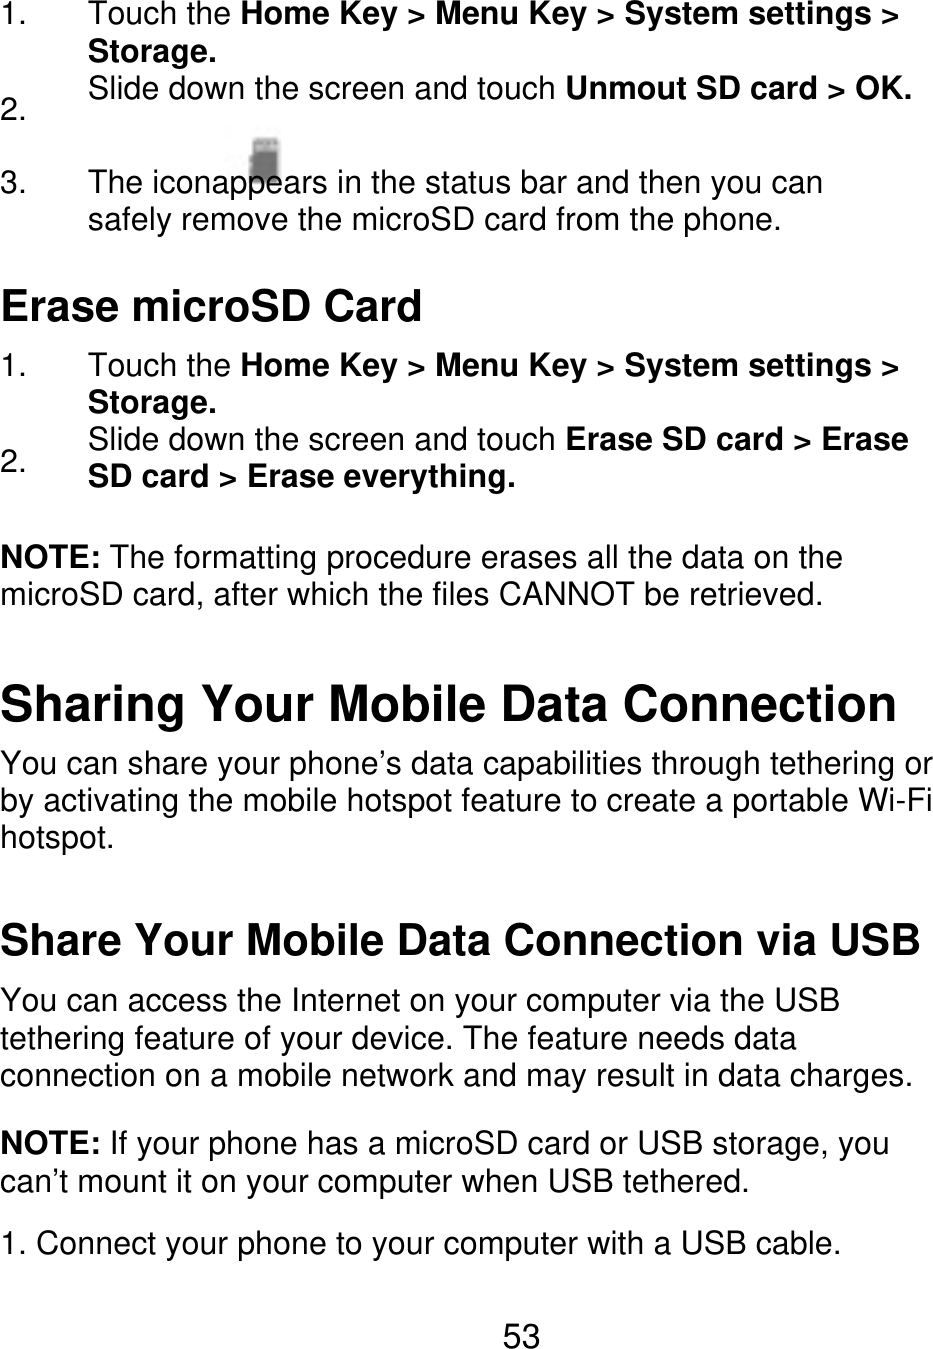 1. 2. 3. Touch the Home Key &gt; Menu Key &gt; System settings &gt; Storage. Slide down the screen and touch Unmout SD card &gt; OK. The iconappears in the status bar and then you can safely remove the microSD card from the phone. Erase microSD Card 1. 2. Touch the Home Key &gt; Menu Key &gt; System settings &gt; Storage. Slide down the screen and touch Erase SD card &gt; Erase SD card &gt; Erase everything. NOTE: The formatting procedure erases all the data on the microSD card, after which the files CANNOT be retrieved. Sharing Your Mobile Data Connection You can share your phone’s data capabilities through tethering or by activating the mobile hotspot feature to create a portable Wi-Fi hotspot. Share Your Mobile Data Connection via USB You can access the Internet on your computer via the USB tethering feature of your device. The feature needs data connection on a mobile network and may result in data charges. NOTE: If your phone has a microSD card or USB storage, you can’t mount it on your computer when USB tethered. 1. Connect your phone to your computer with a USB cable. 53 